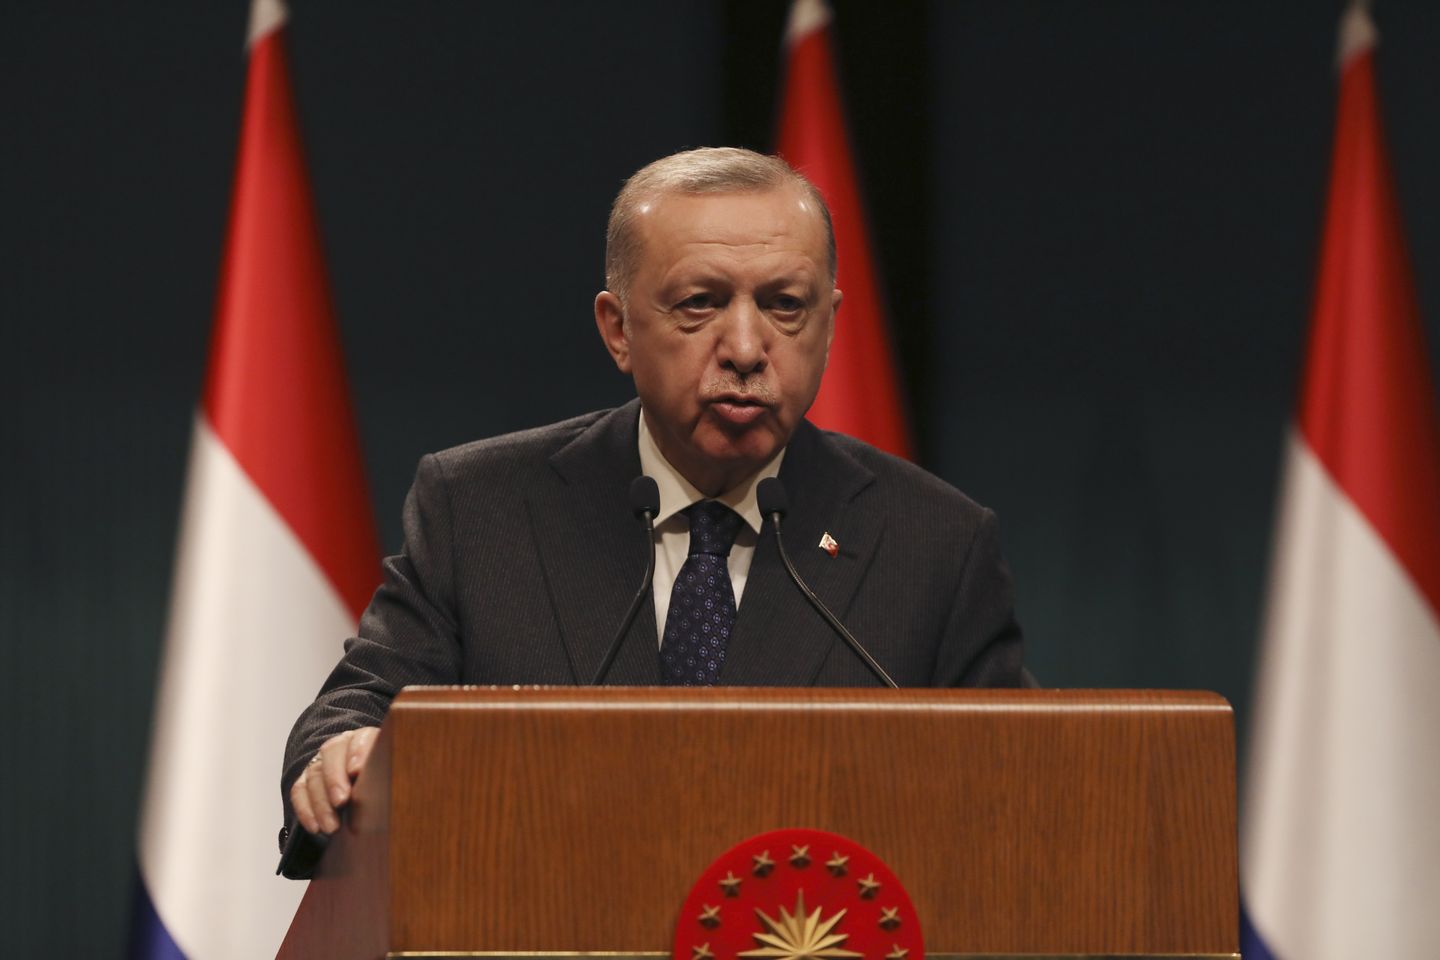 Turkish President Recep Tayyip Erdogan pours cold water on NATO hopes for Finland, Sweden